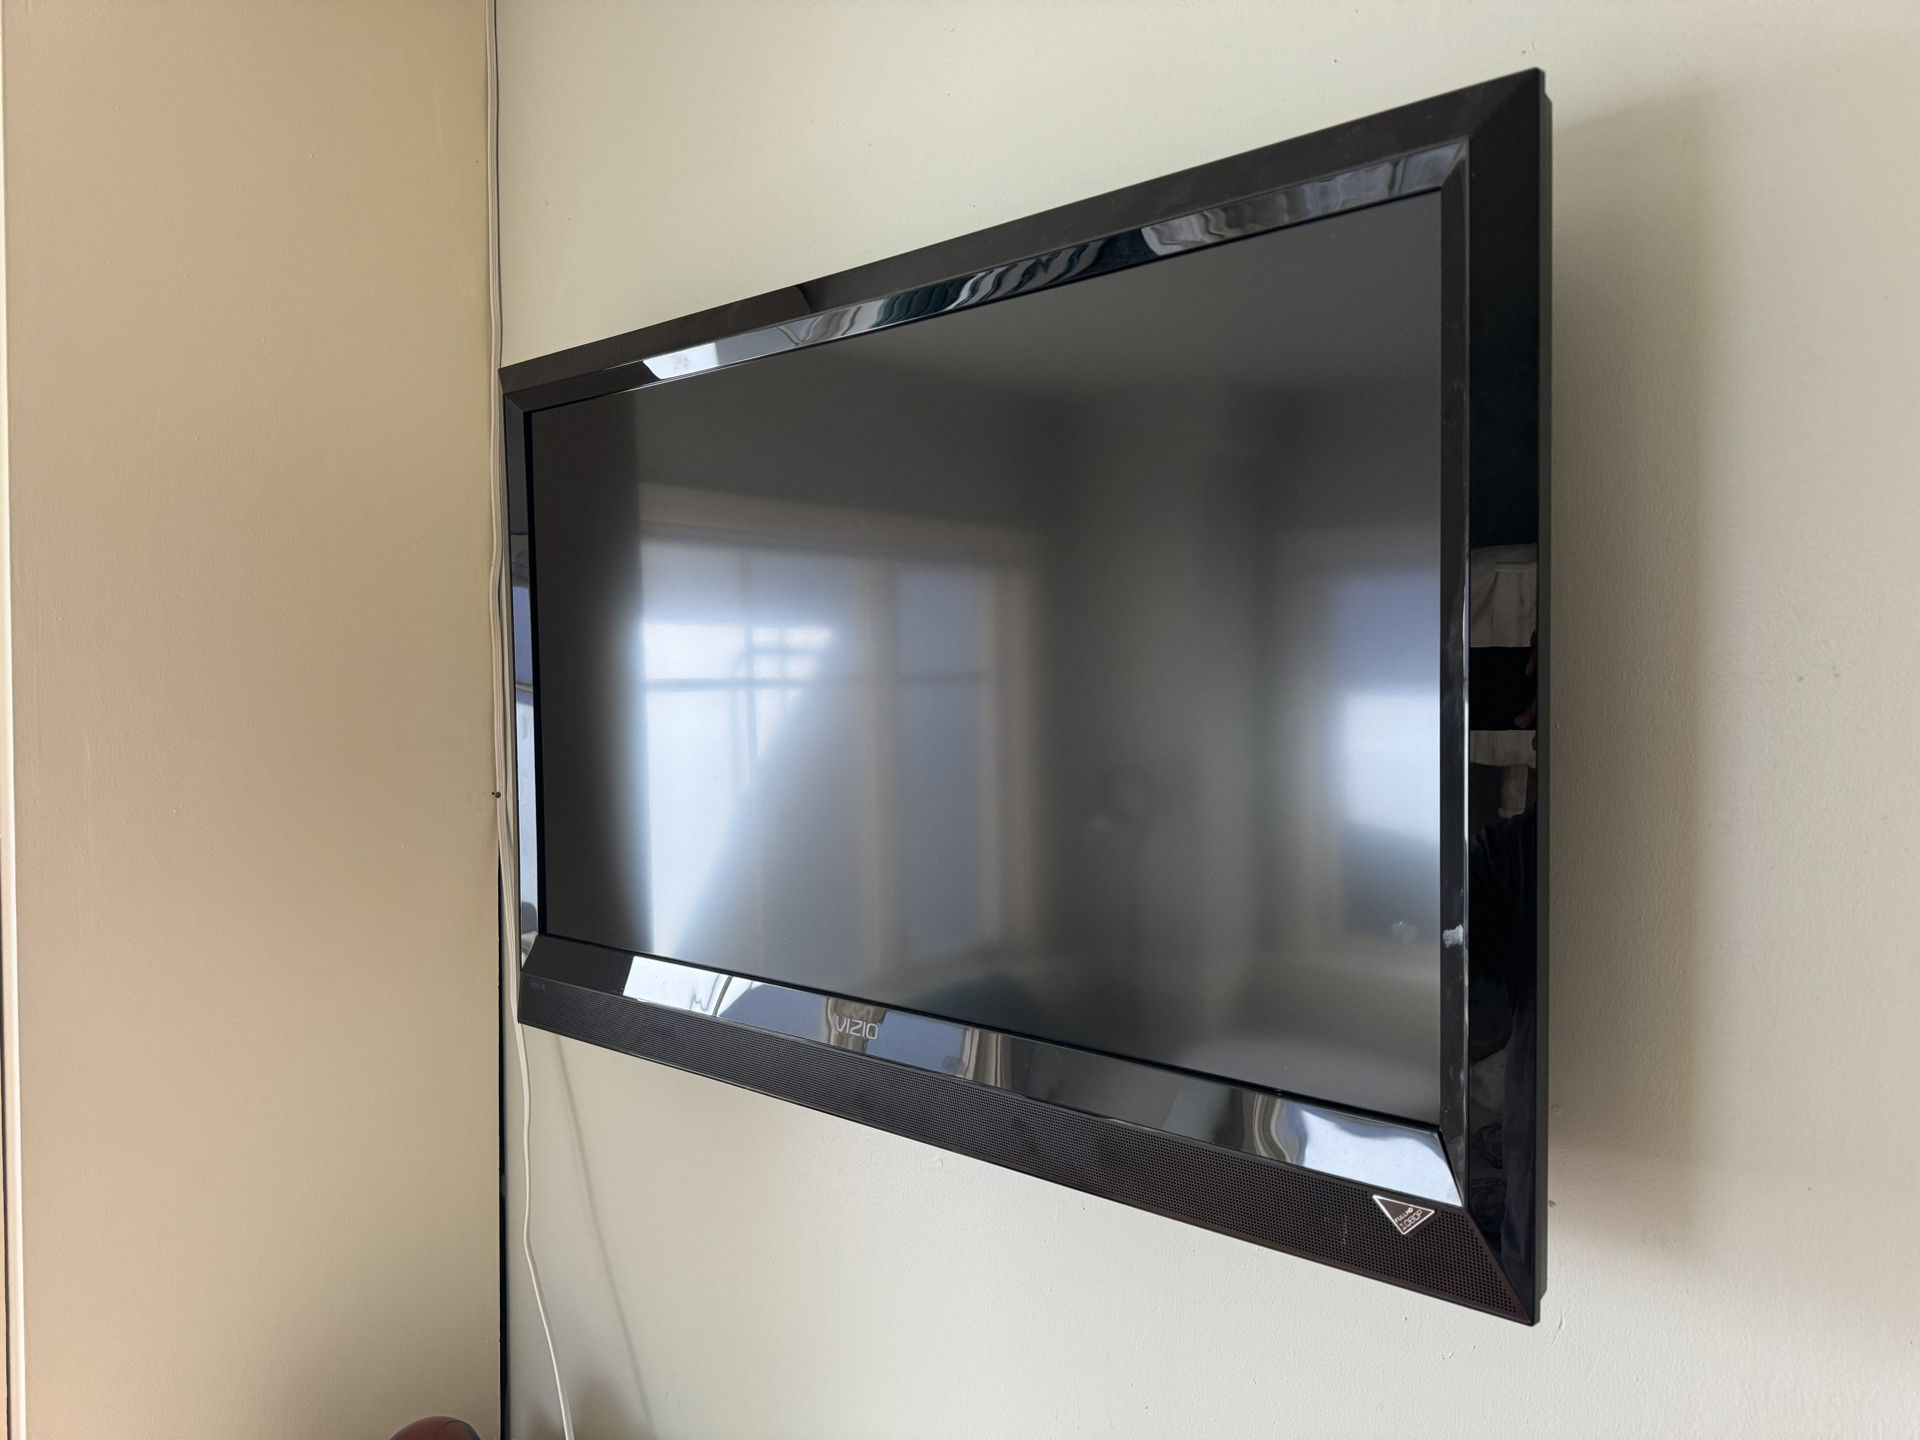 Vizio 37 Inch TV with Wall Mount